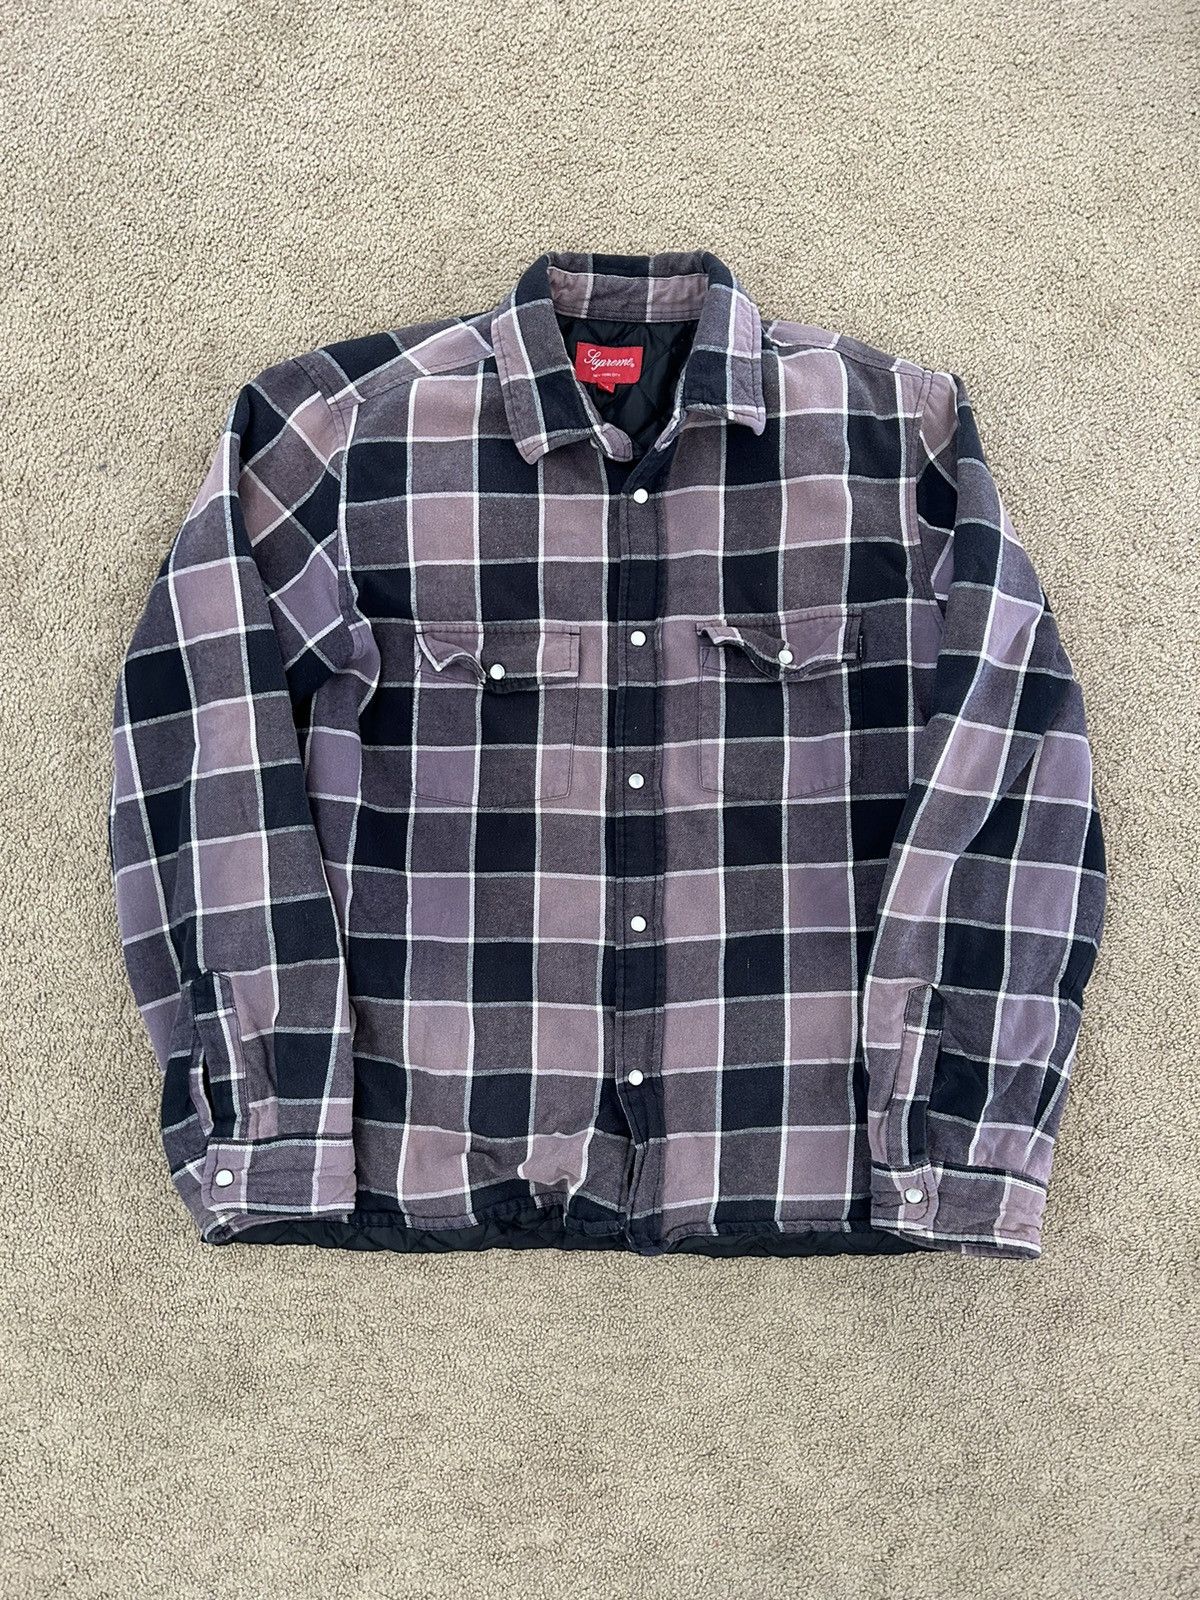 Supreme Supreme Quilted Faded Plaid Shirt | Grailed